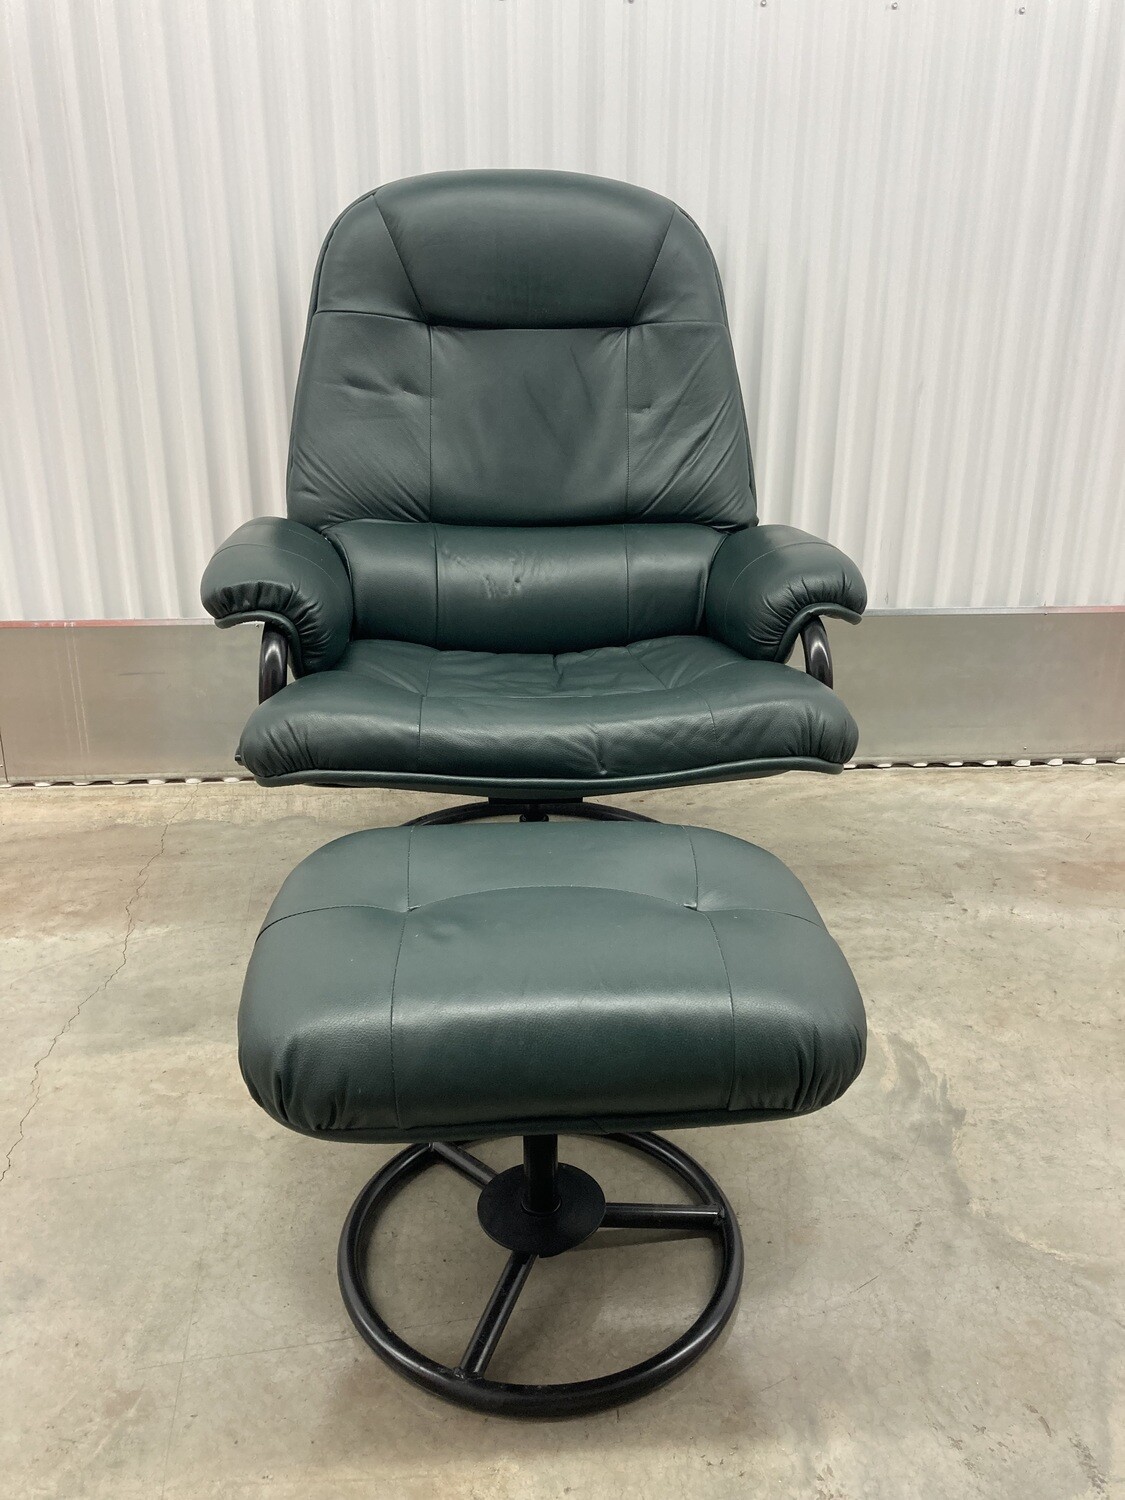 Swivel Recliner with Ottoman excellent condition green #2198